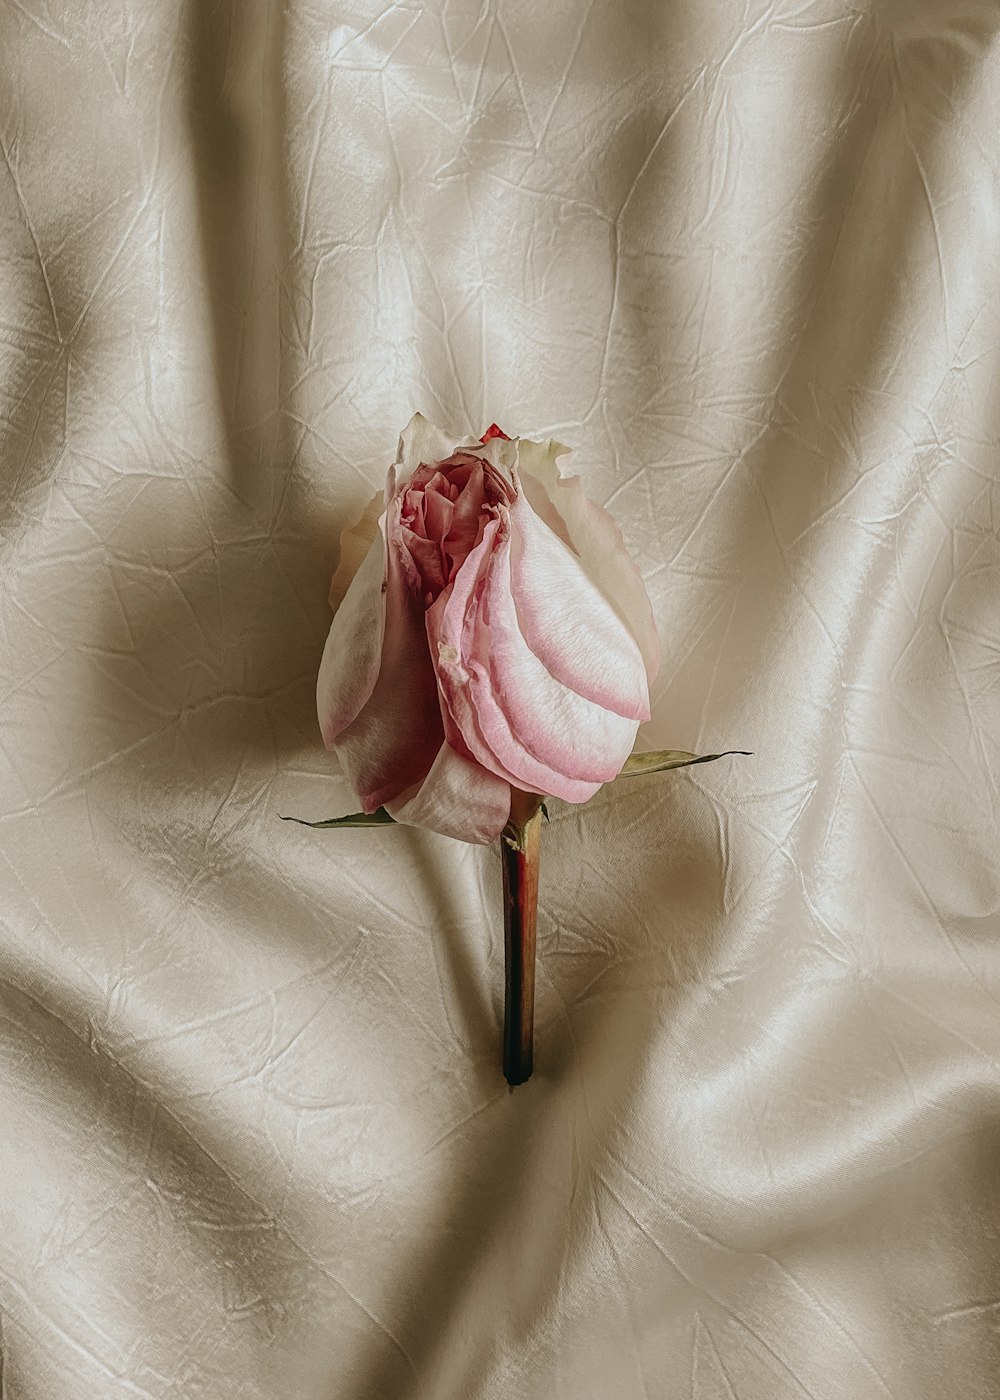 a single pink flower on a white cloth